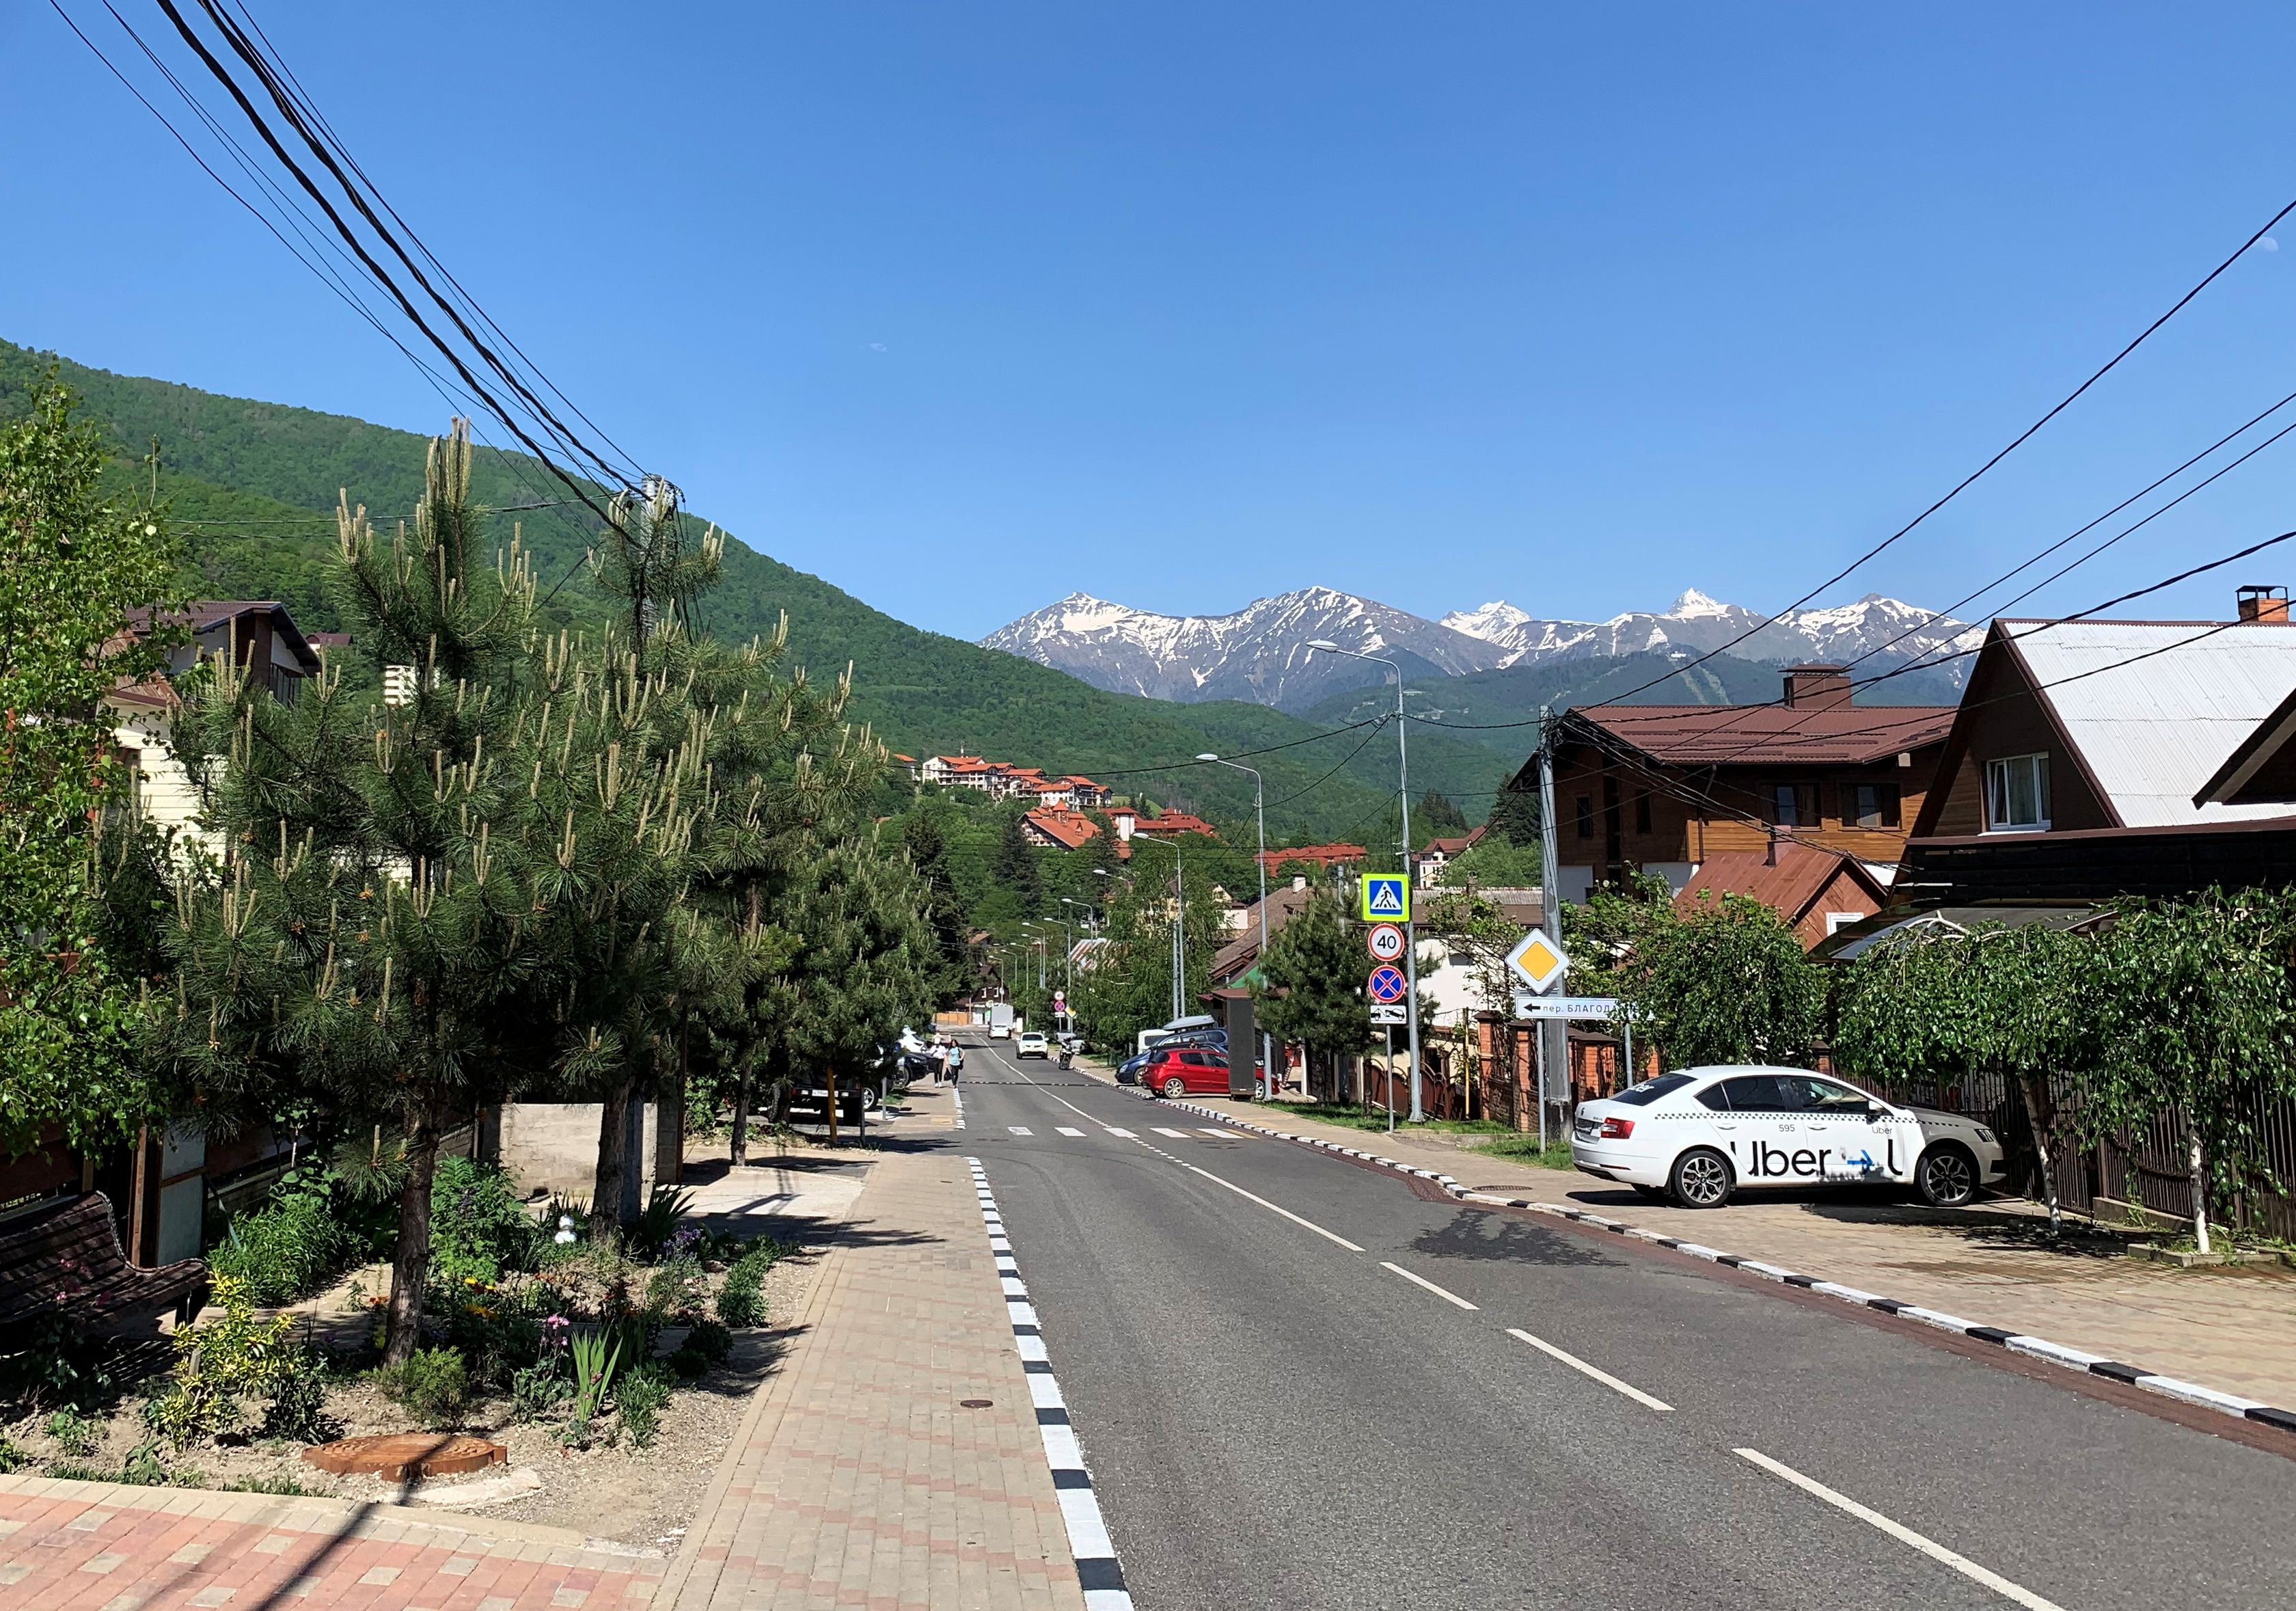 A view shows a street in the village of Krasnaya Polyana